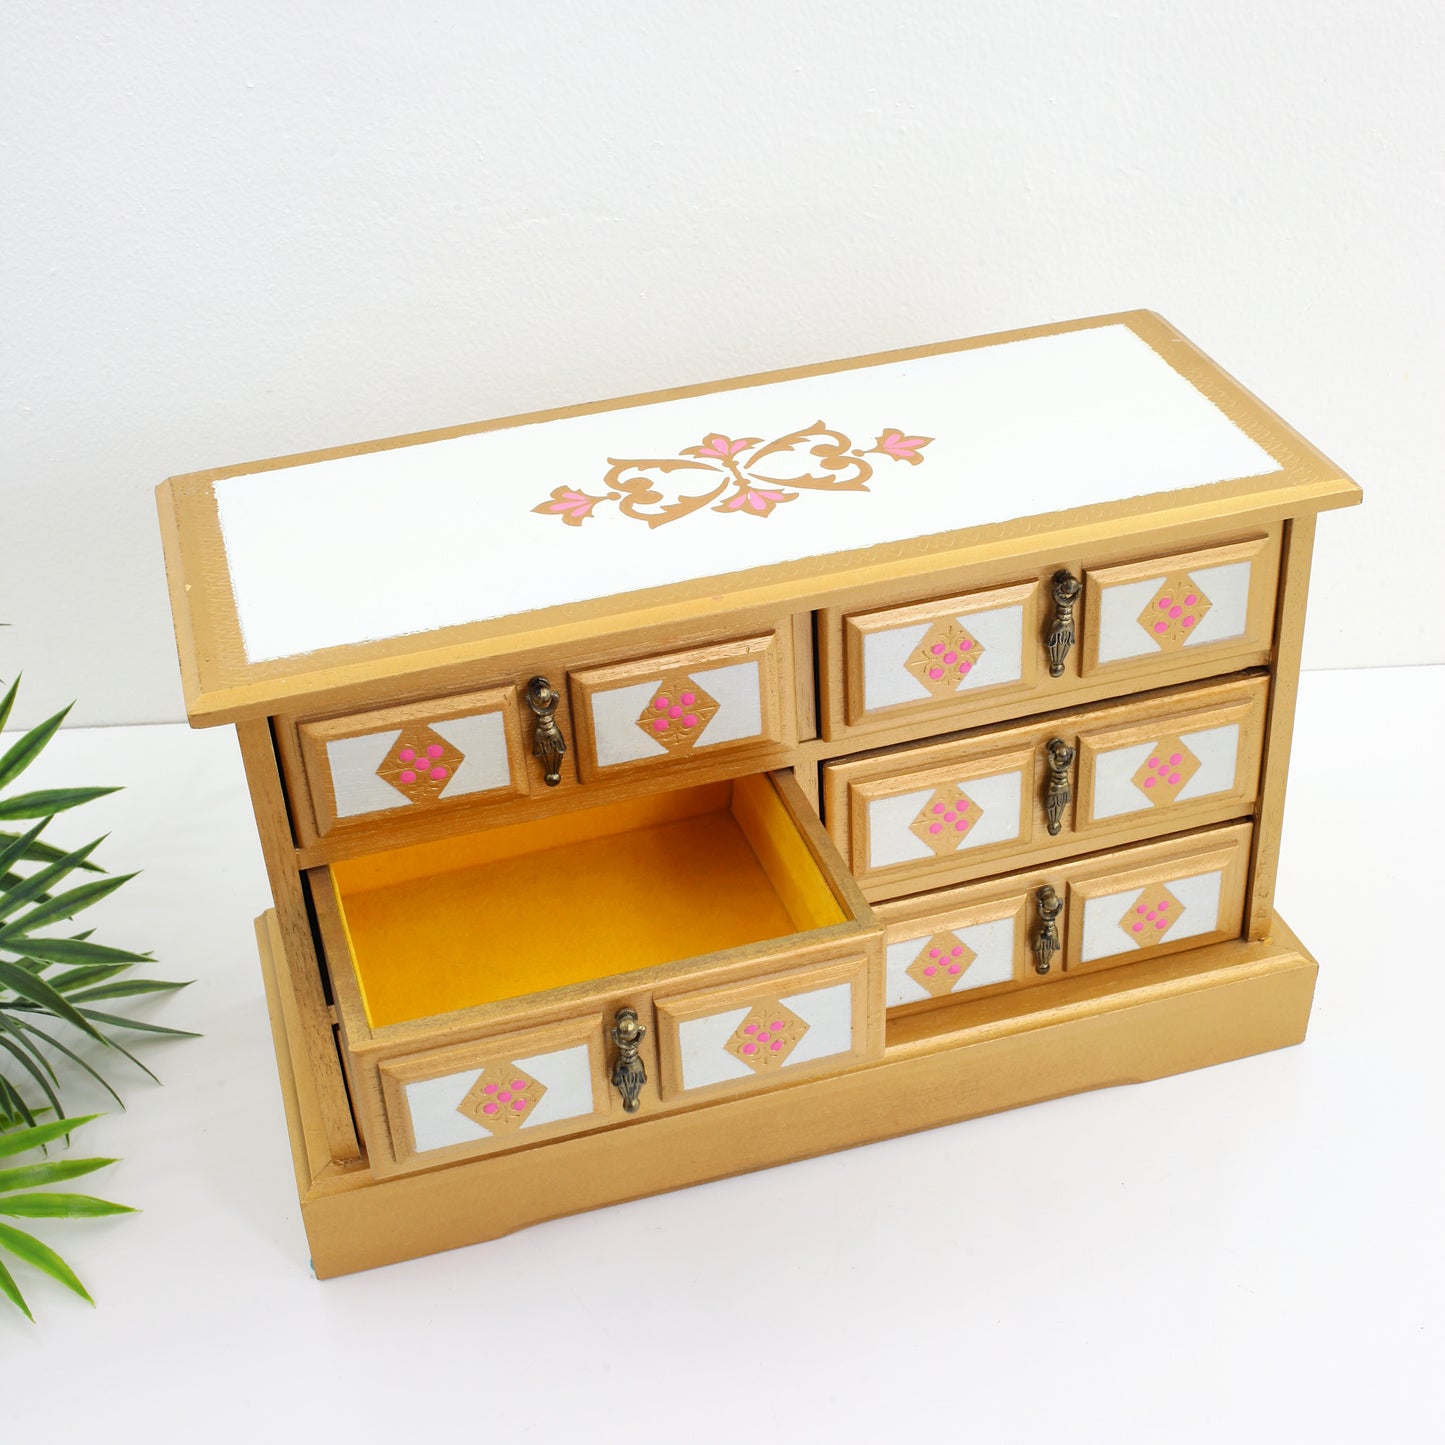 SOLD - Vintage Musical Florentine Jewelry Box in Pink & Gold